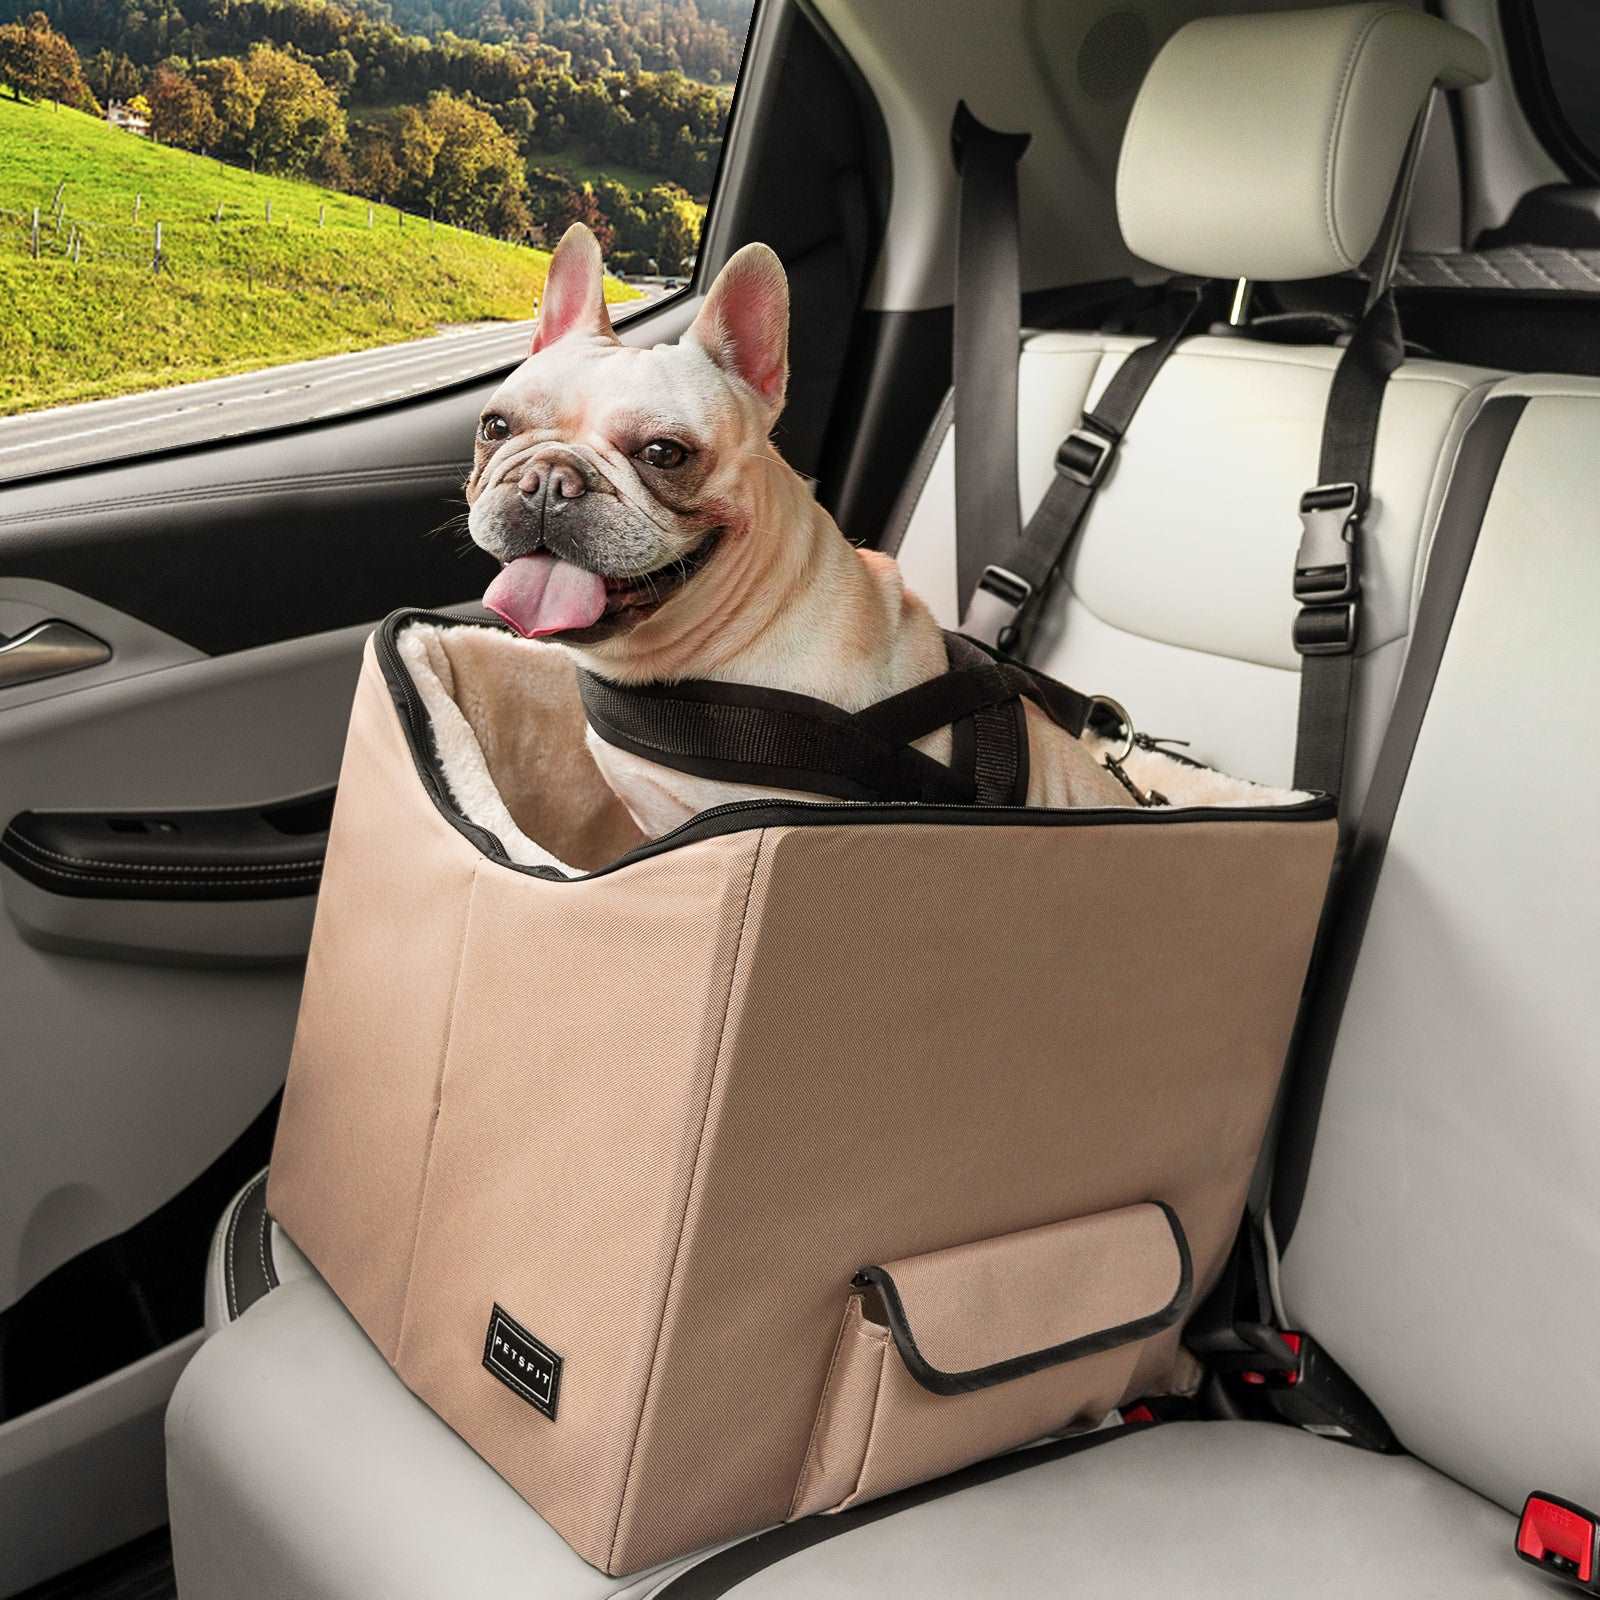 Petsfit-Dog-Car-Seat-Pet-Travel-Car-Booster-Seat-with-Safety-Belt-10